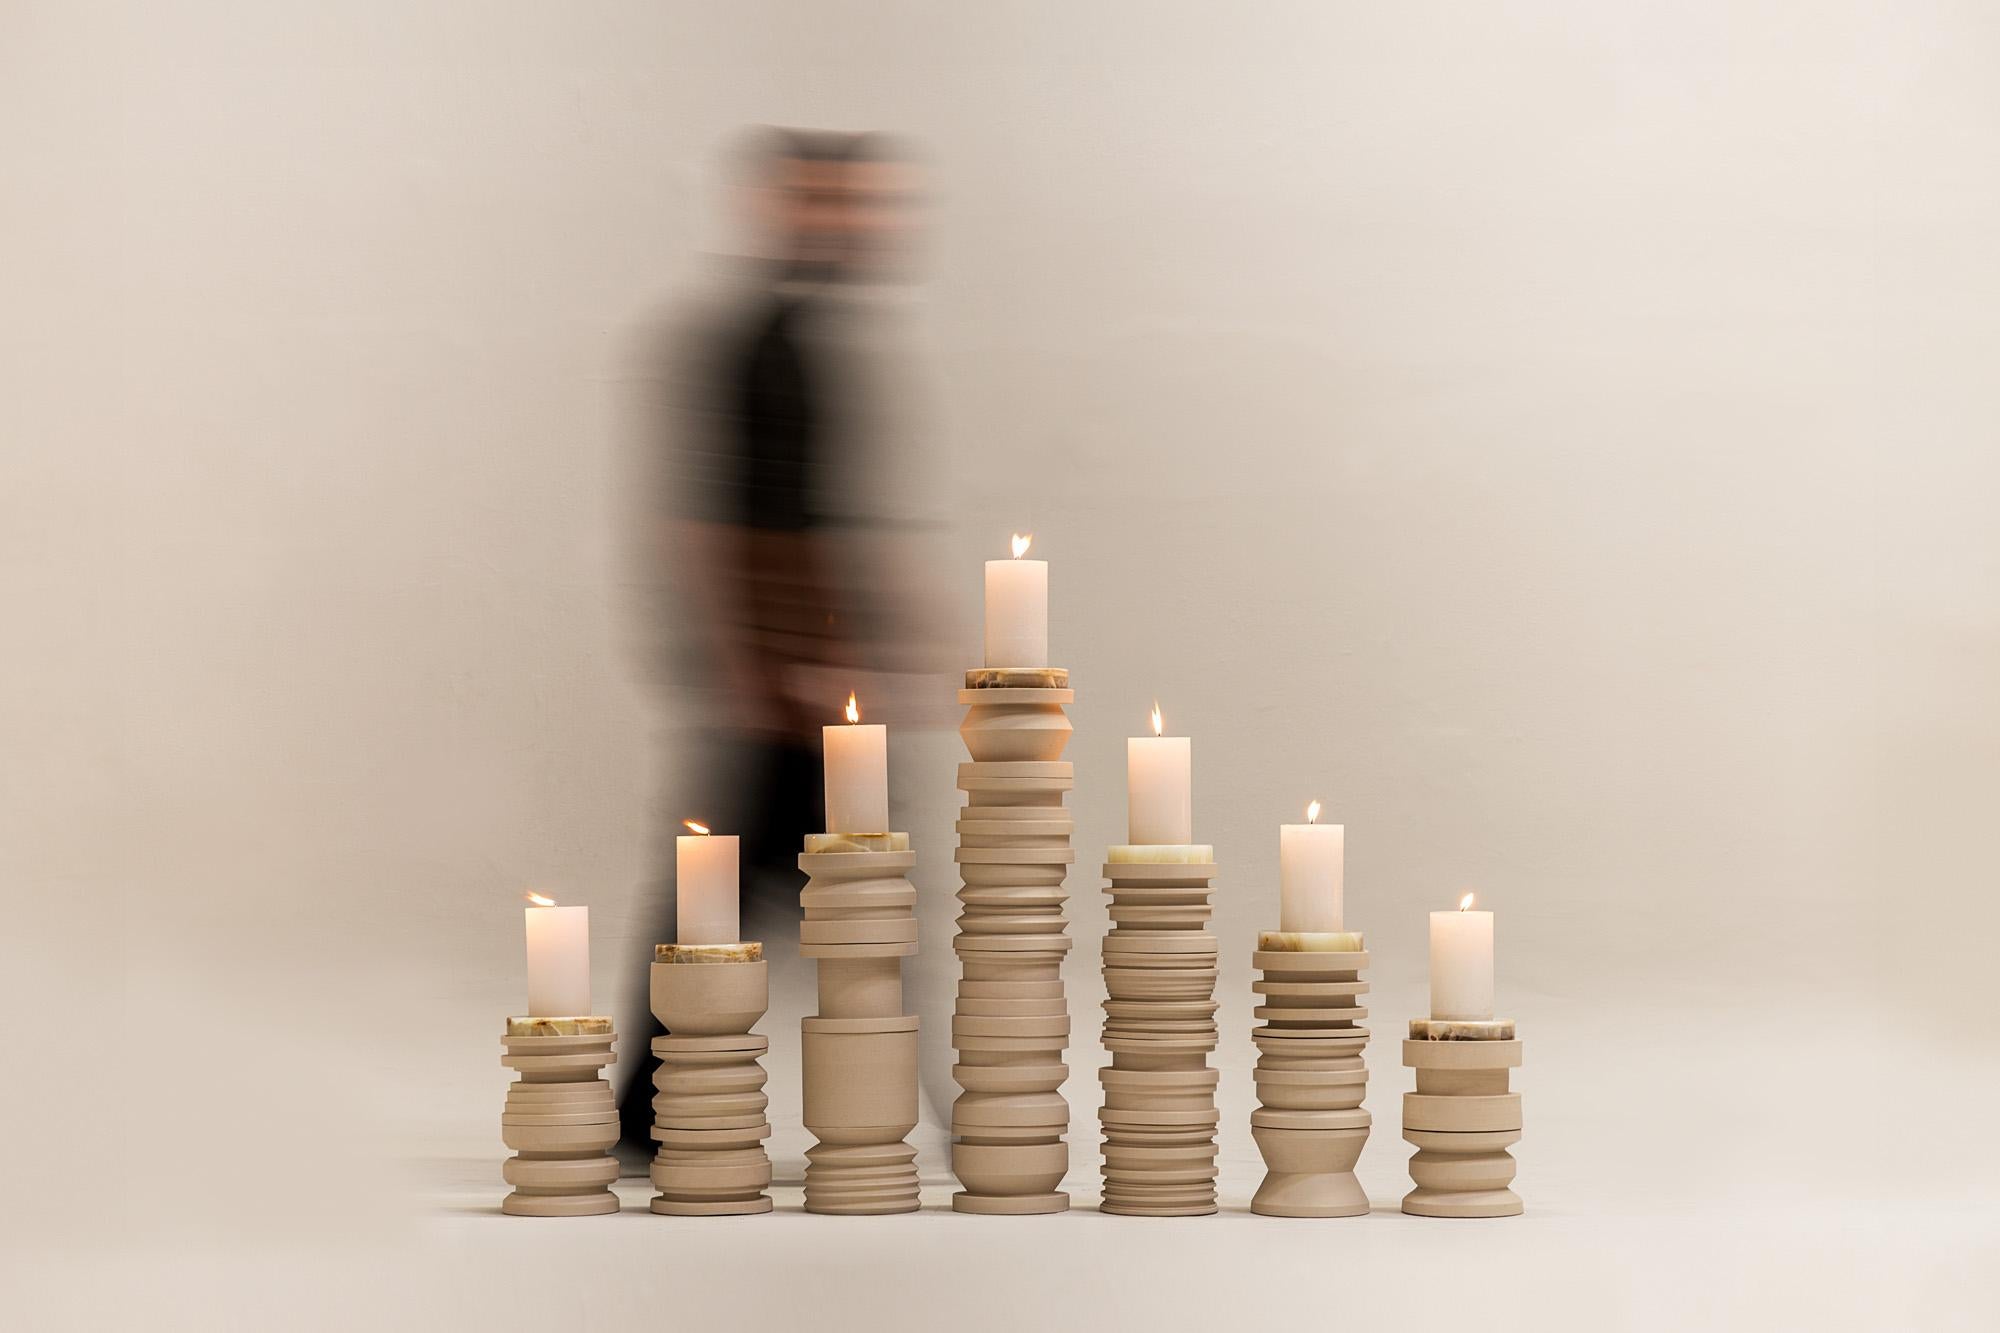 Set of 7 totemic candelabra towers with stepped totemic character. Structured through a system of stackable modules, they allow different variables of height and configuration that result in a low-scale installation. It is the result of the